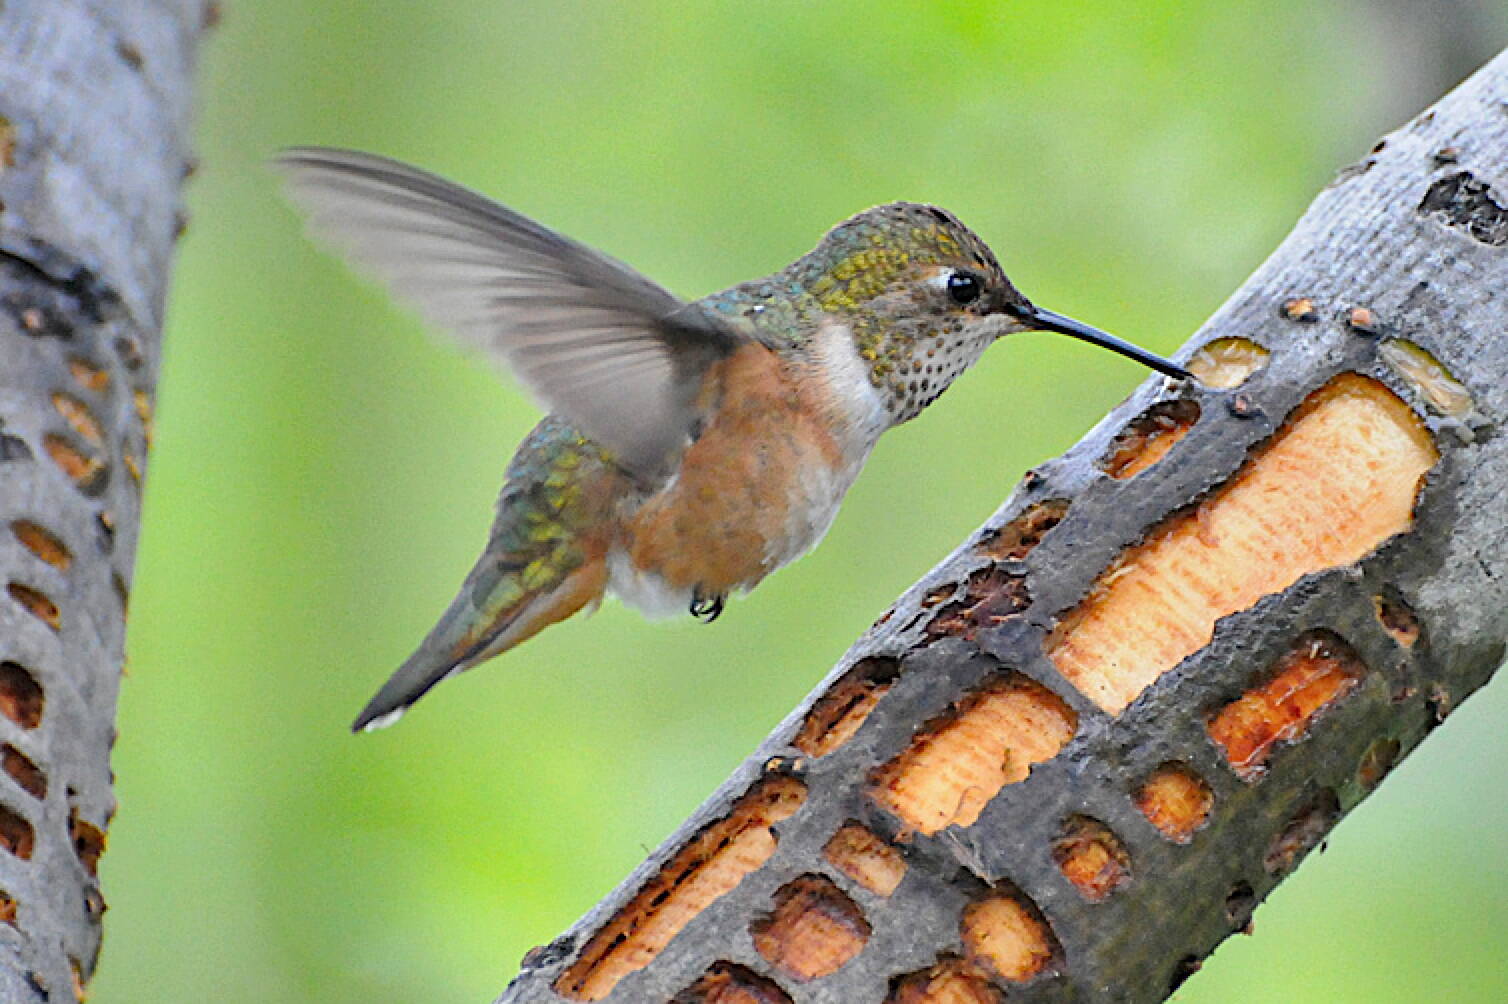 Sapsucker wells on willows attract hummingbirds as well as insects. (Photo by Bob Armstrong)